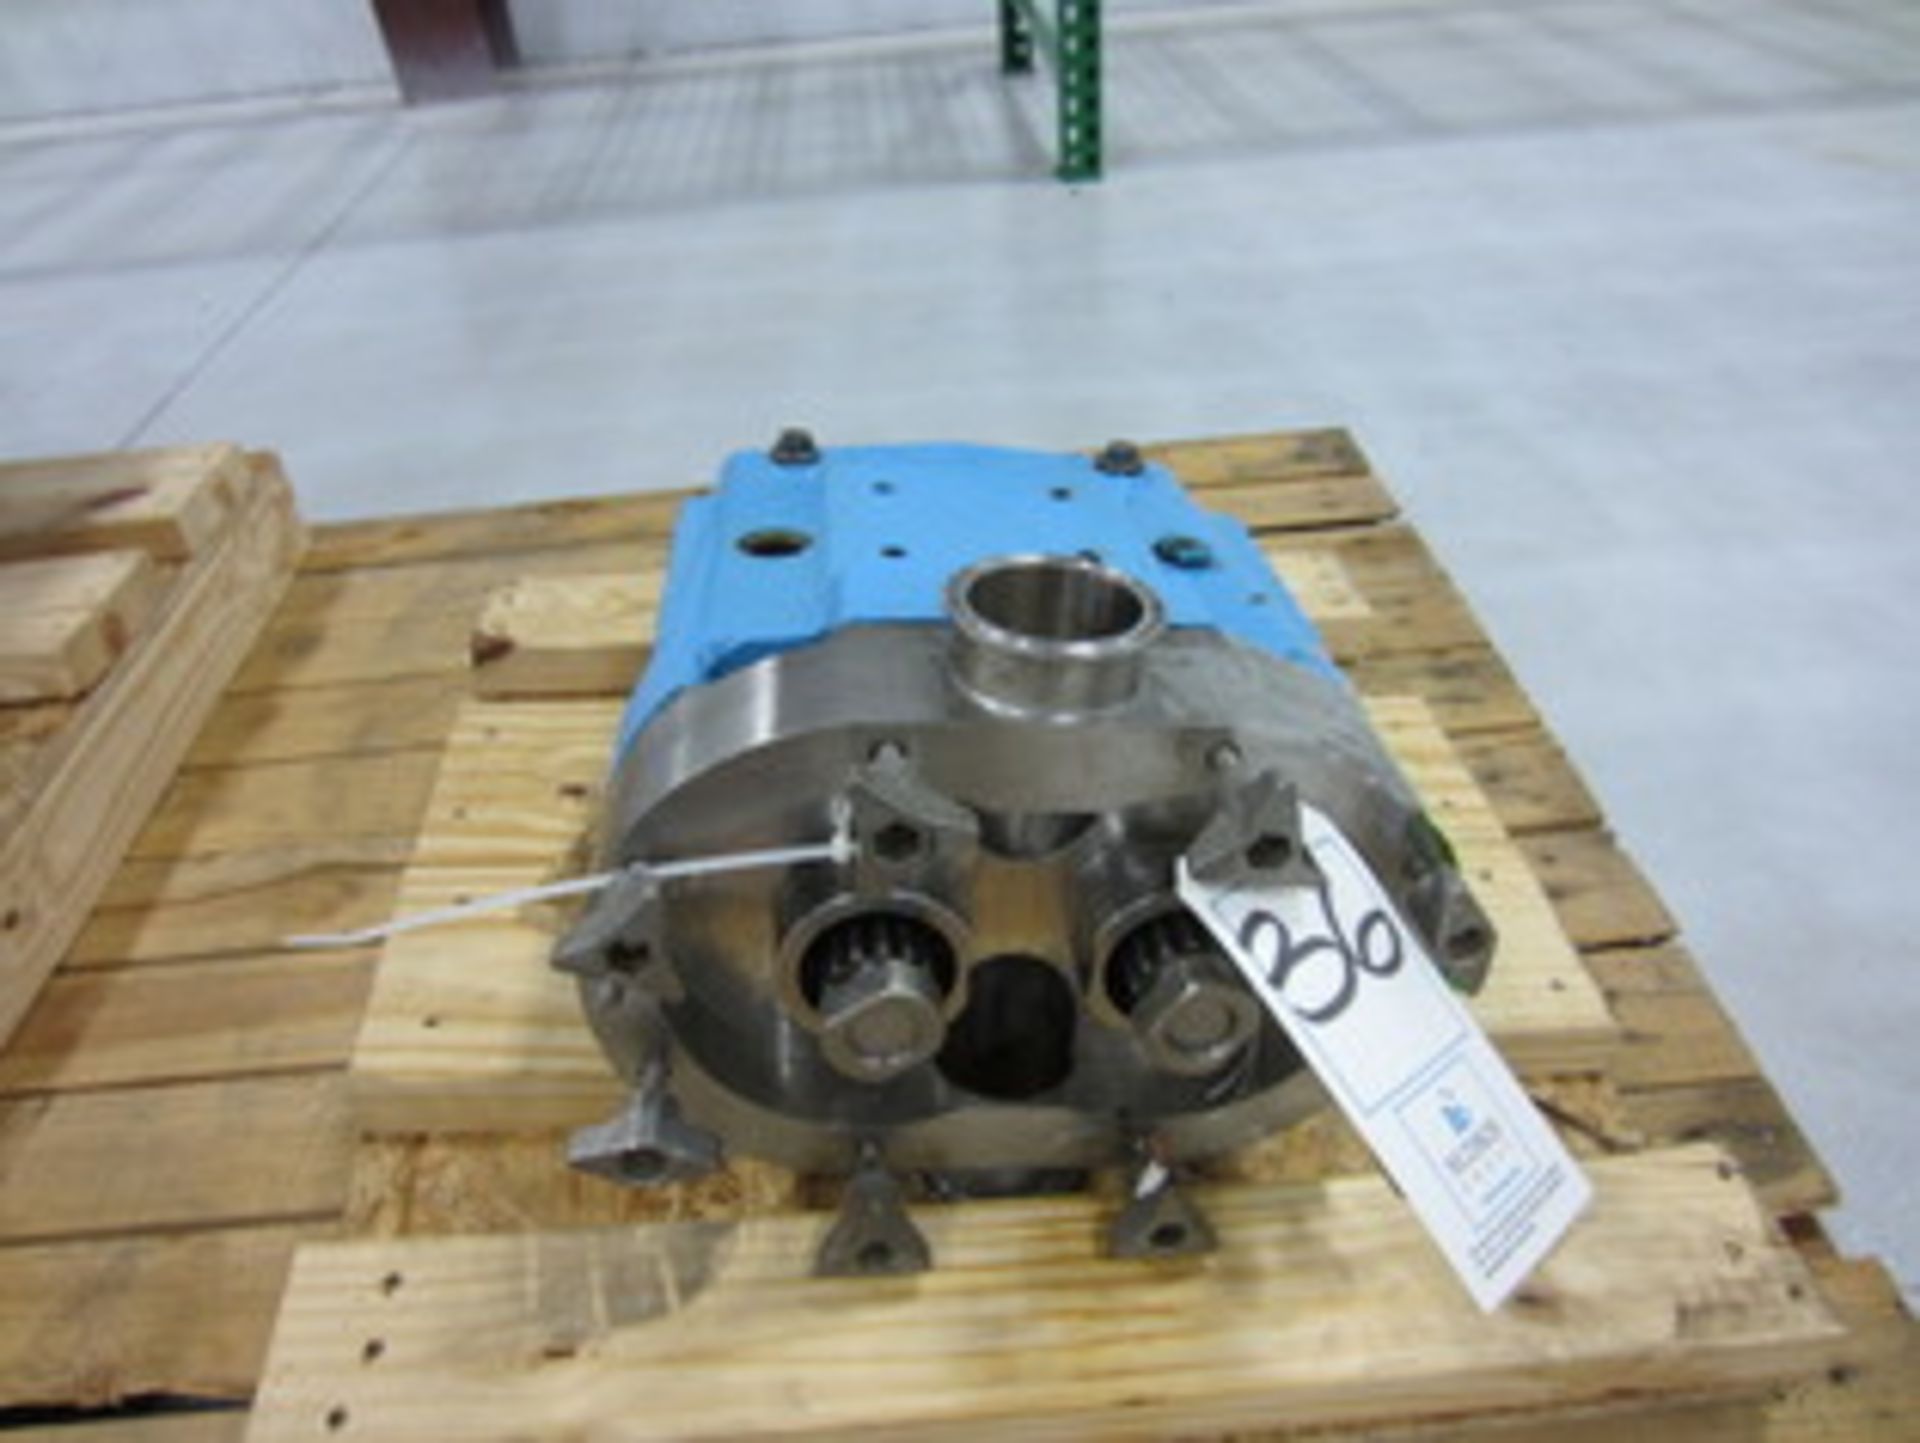 Waukesha Positive Displacement Pump w/ 2-1/2" Clamp Type S/S Head (NOTE: Missing Impellers and Cover